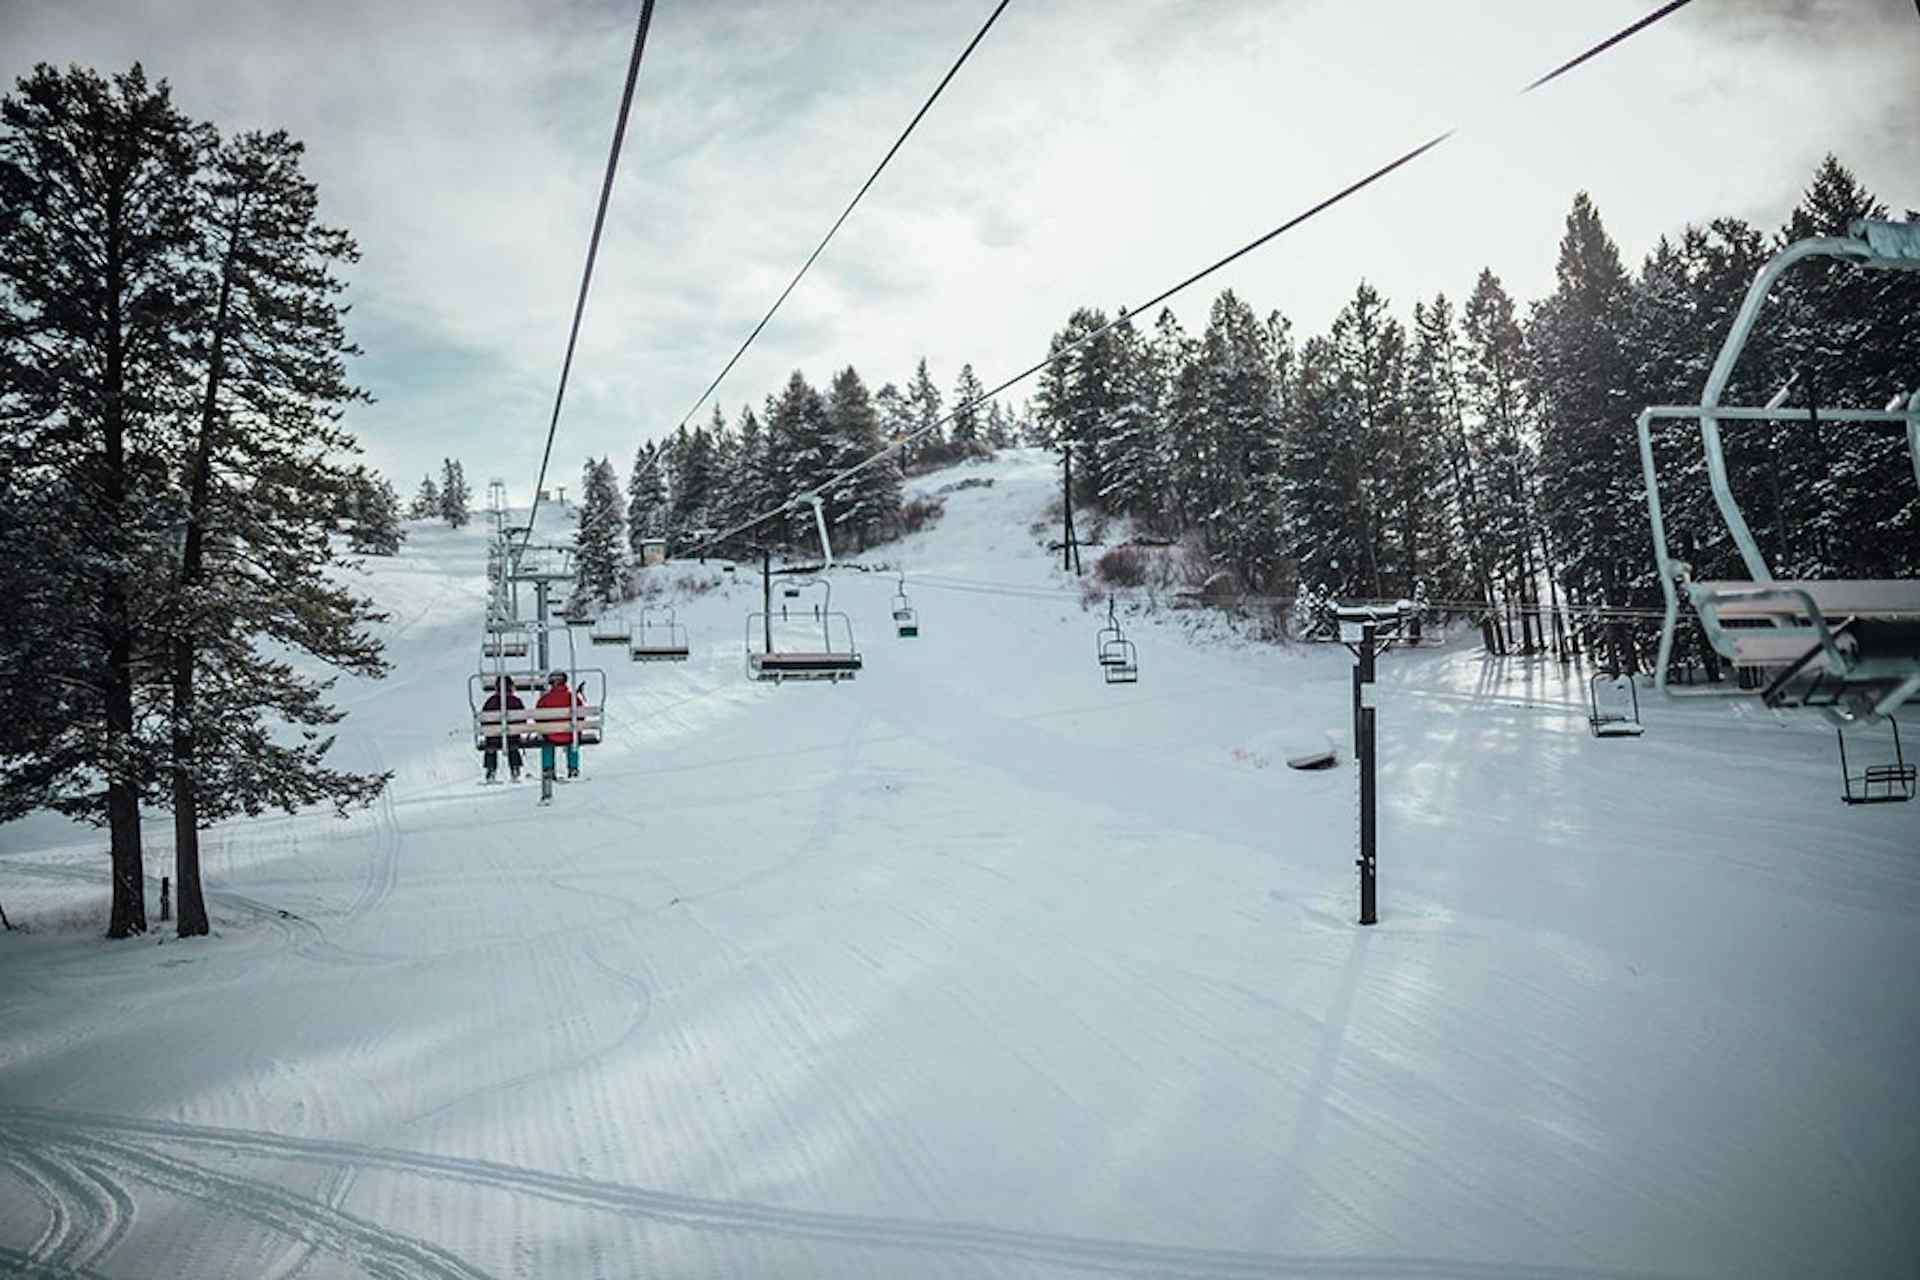 Kelly Canyon Ski Resort, nestled into the Targhee National Forest of the Yellowstone Teton Territory, offers top of the line skiing and snowboarding adventures for any level. 